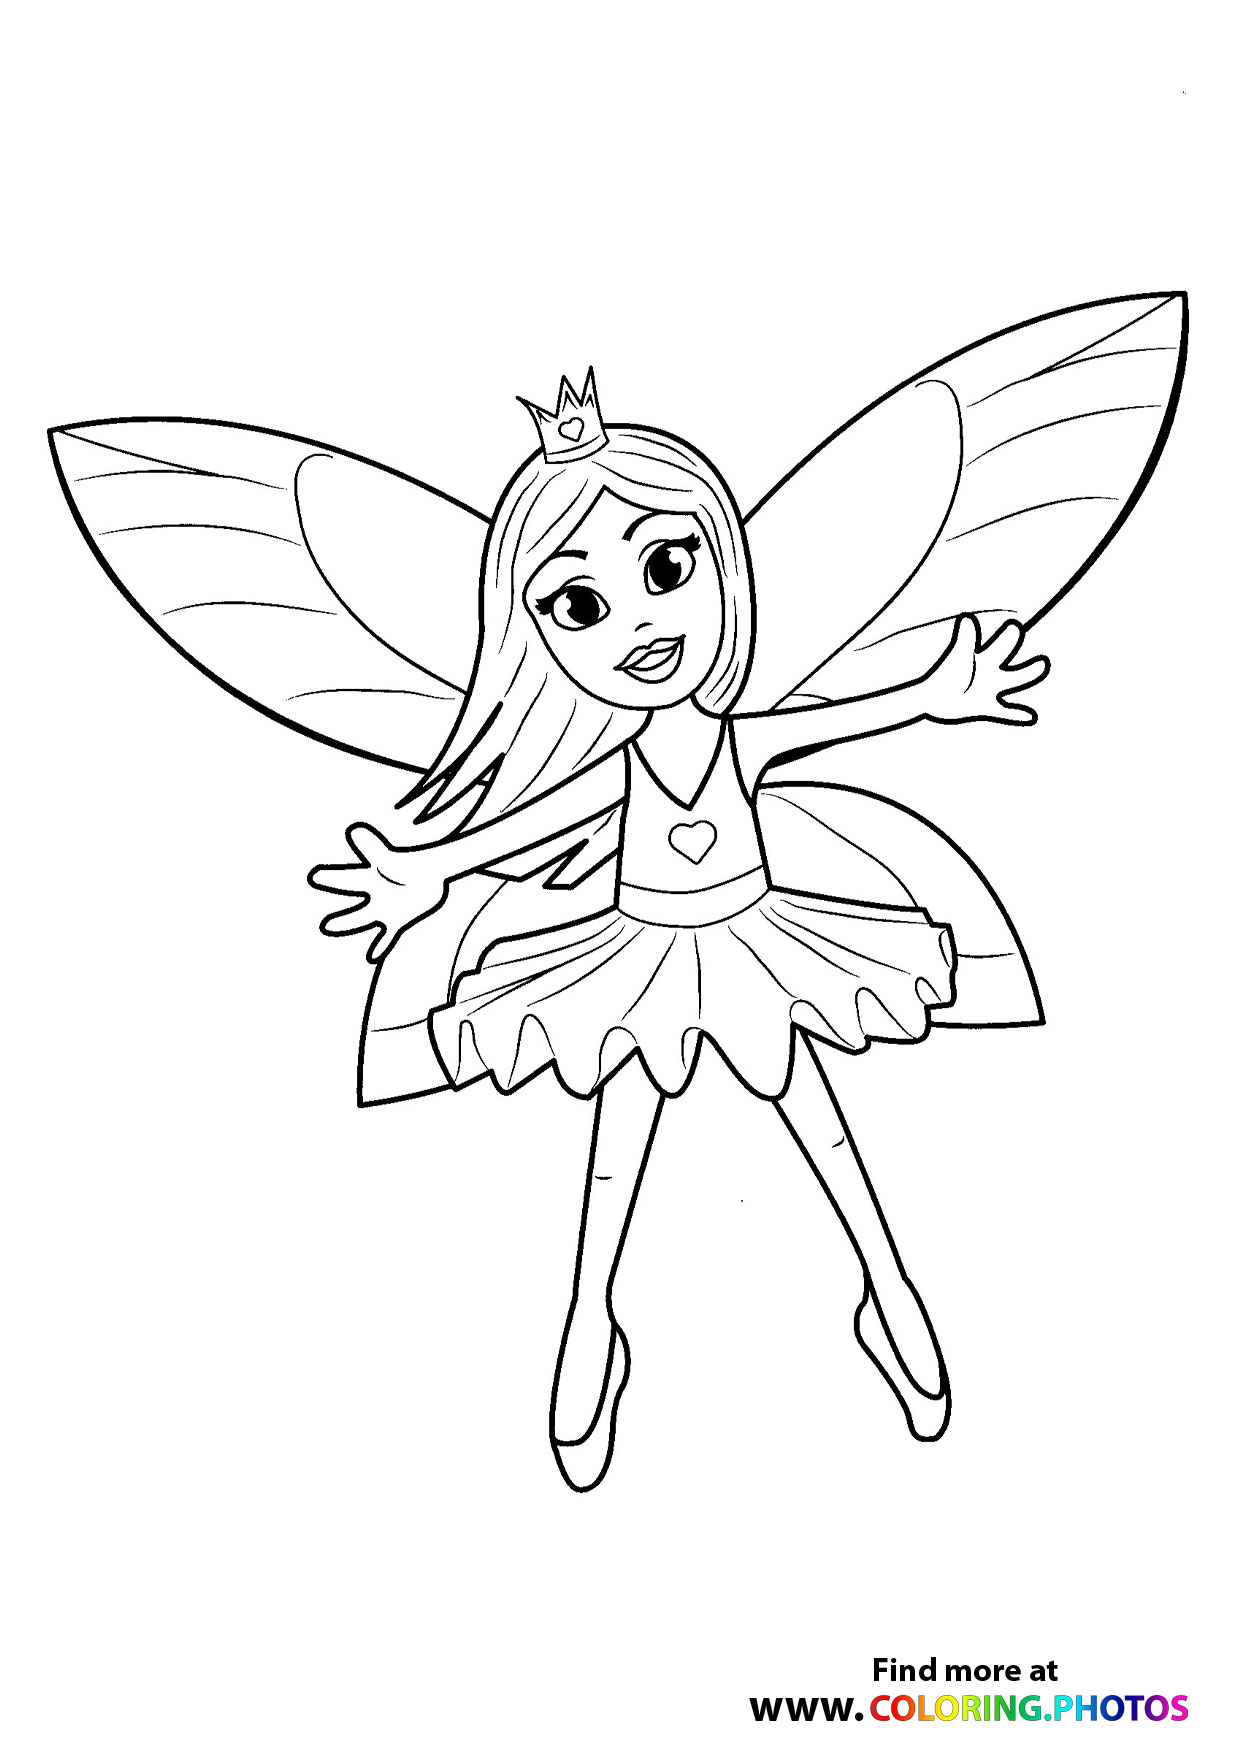 How to Draw a Fairy - 18 Steps to Create Your Own Fairy